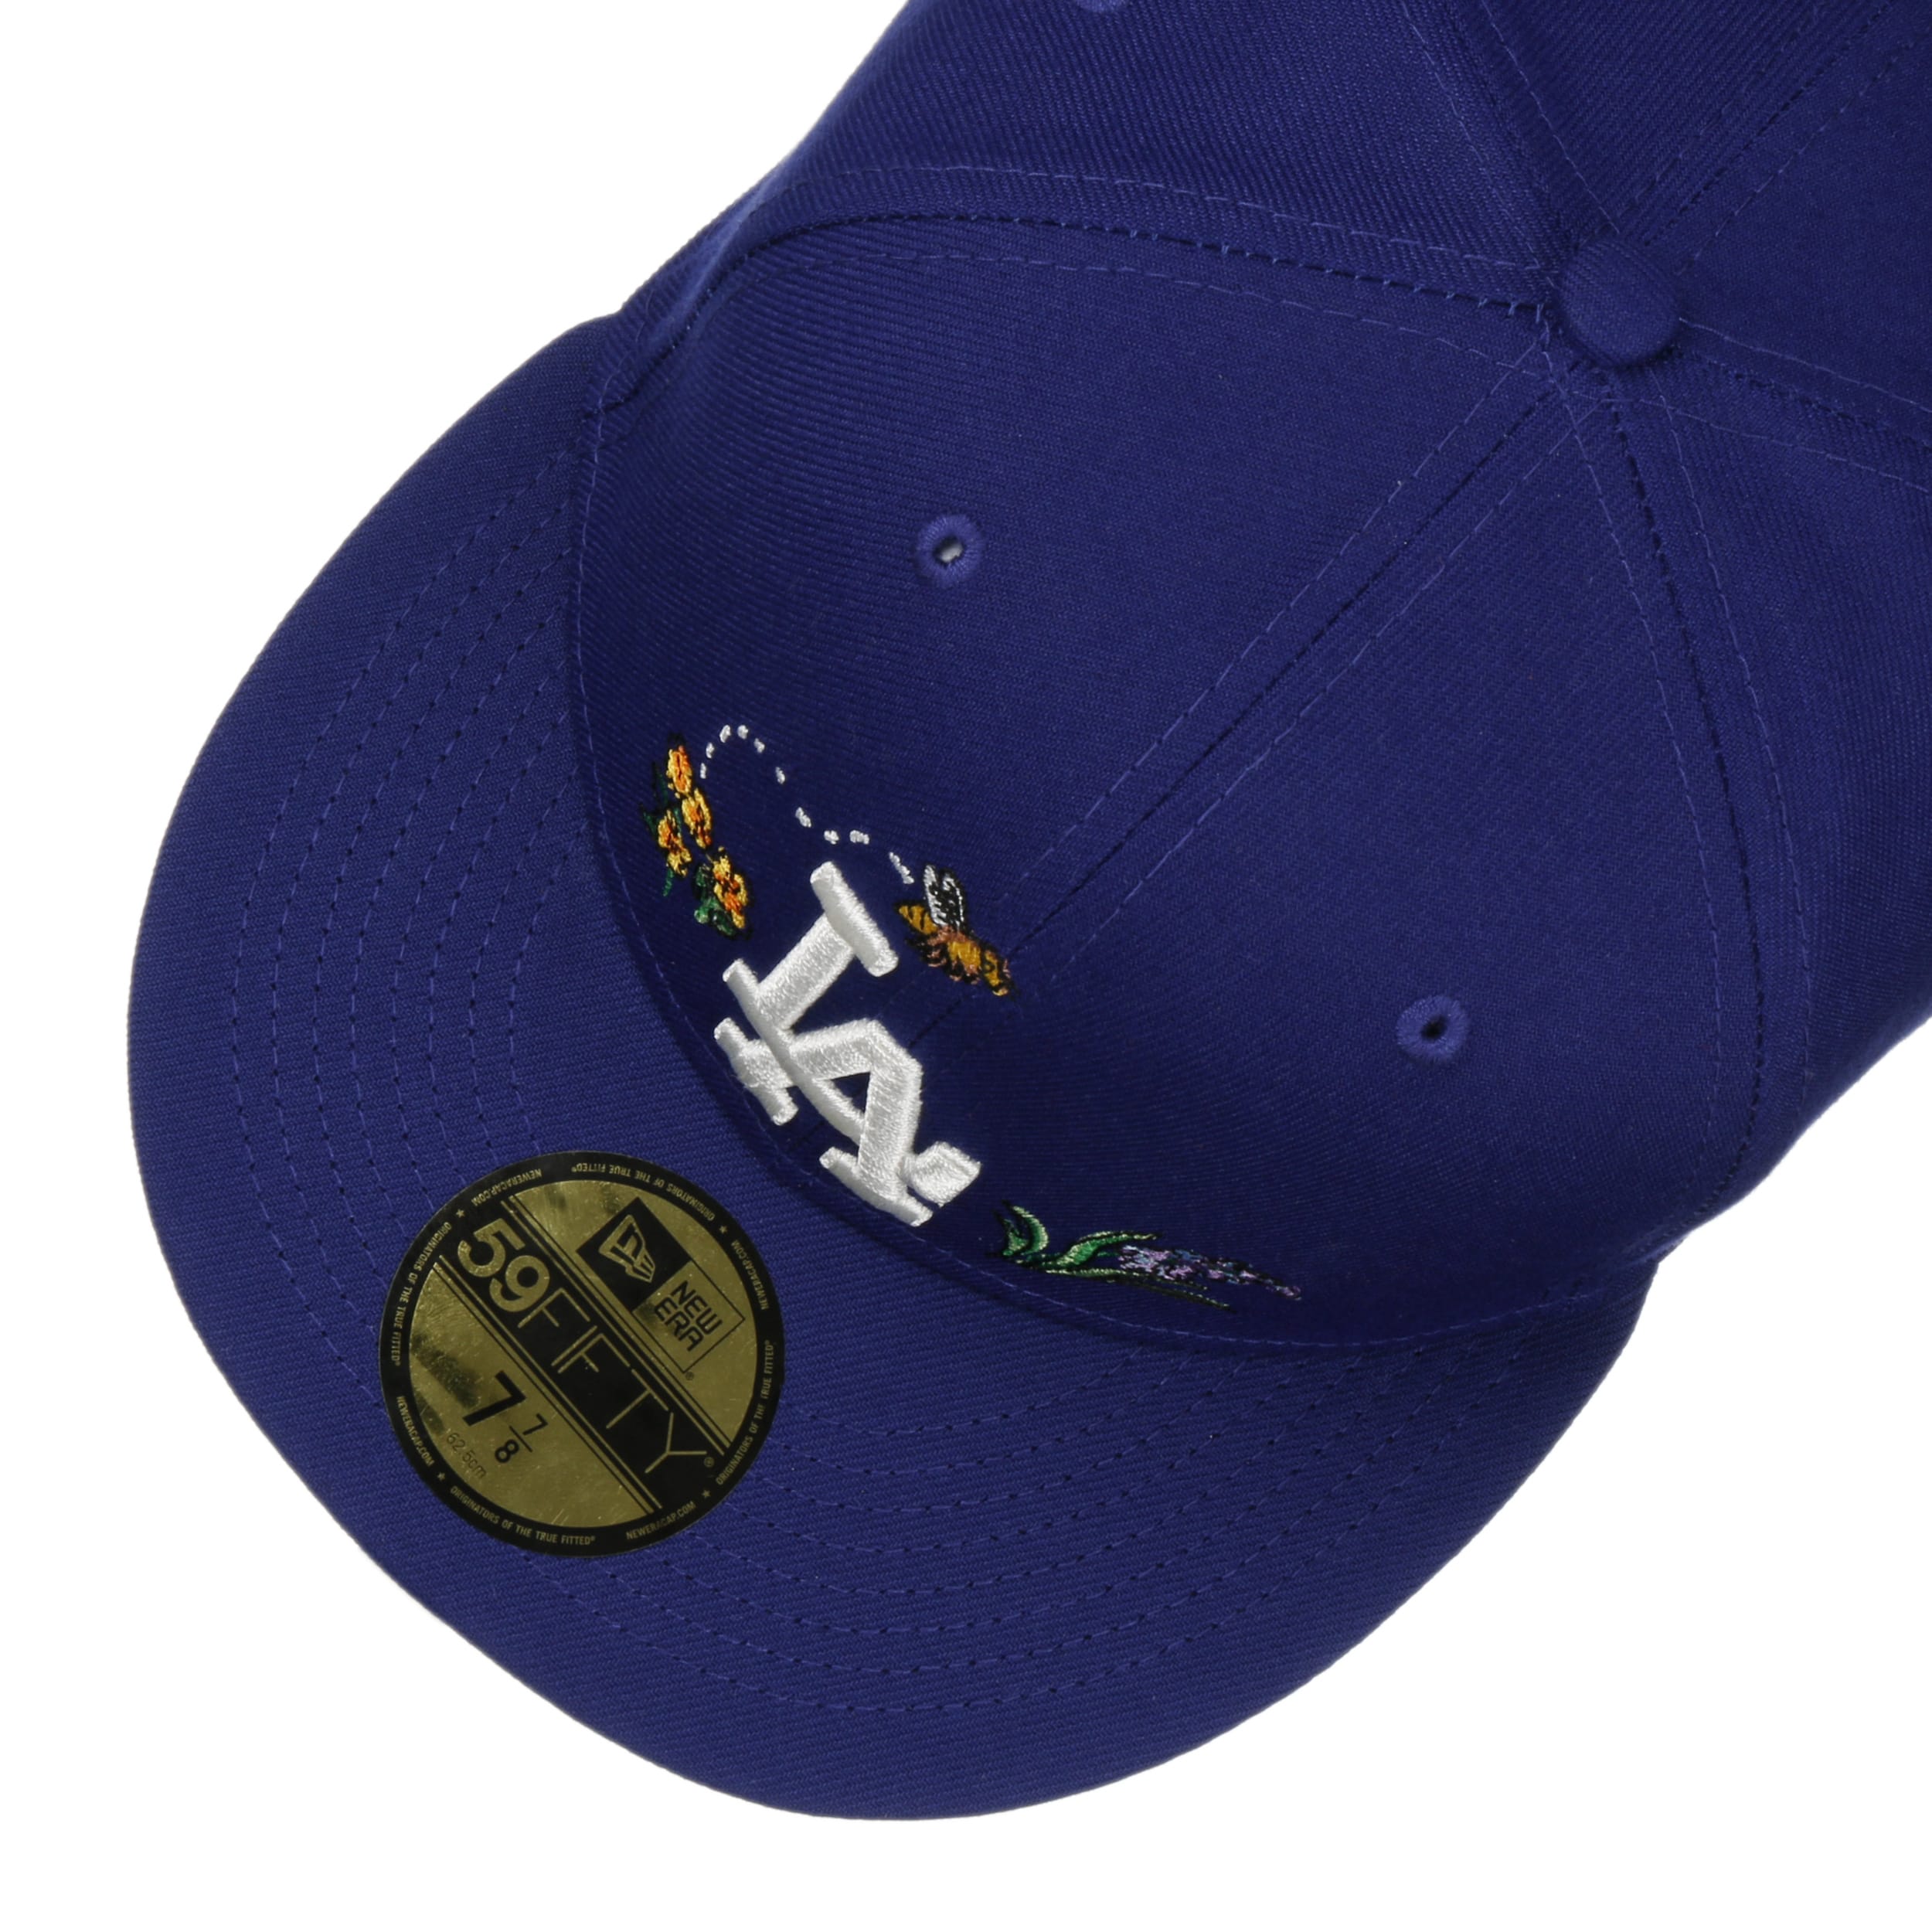 New Era 59forty Los Angeles Dodgers Adjustable Cap Hat Curved